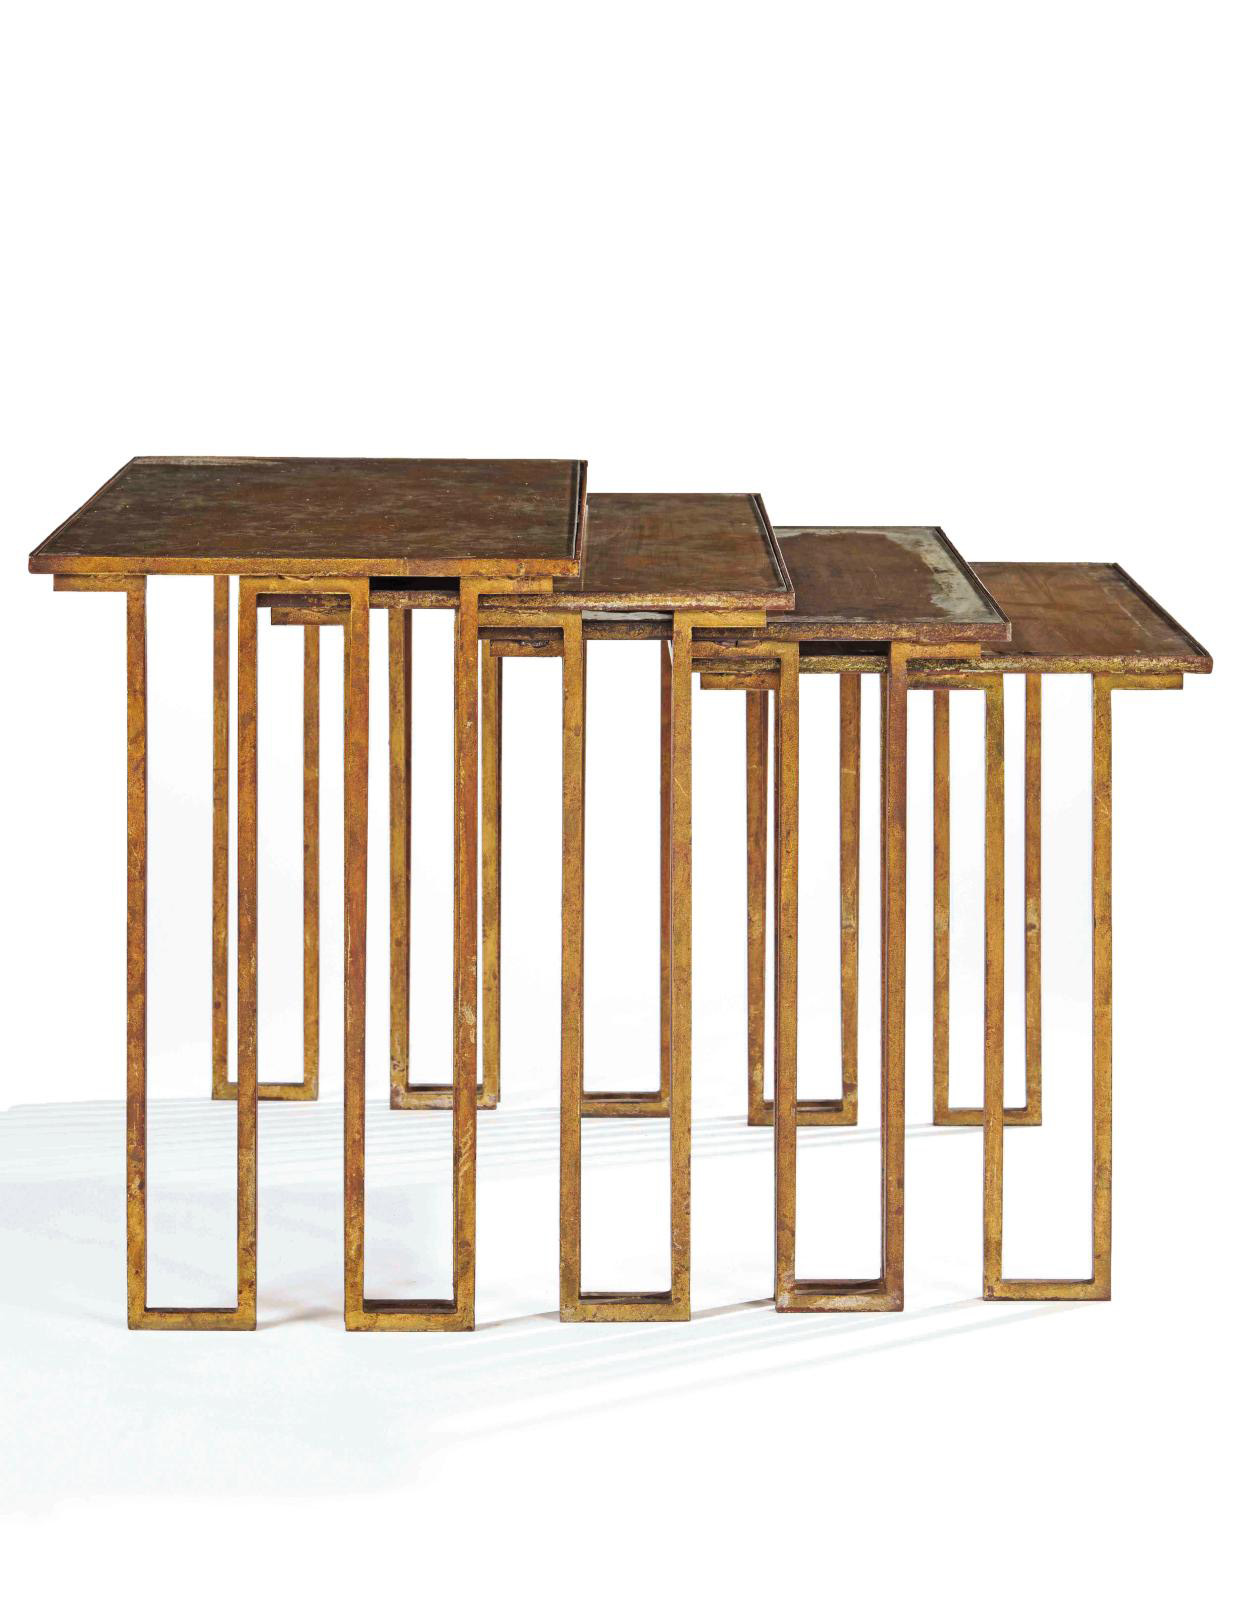 Jean Royère’s Nesting Tables 